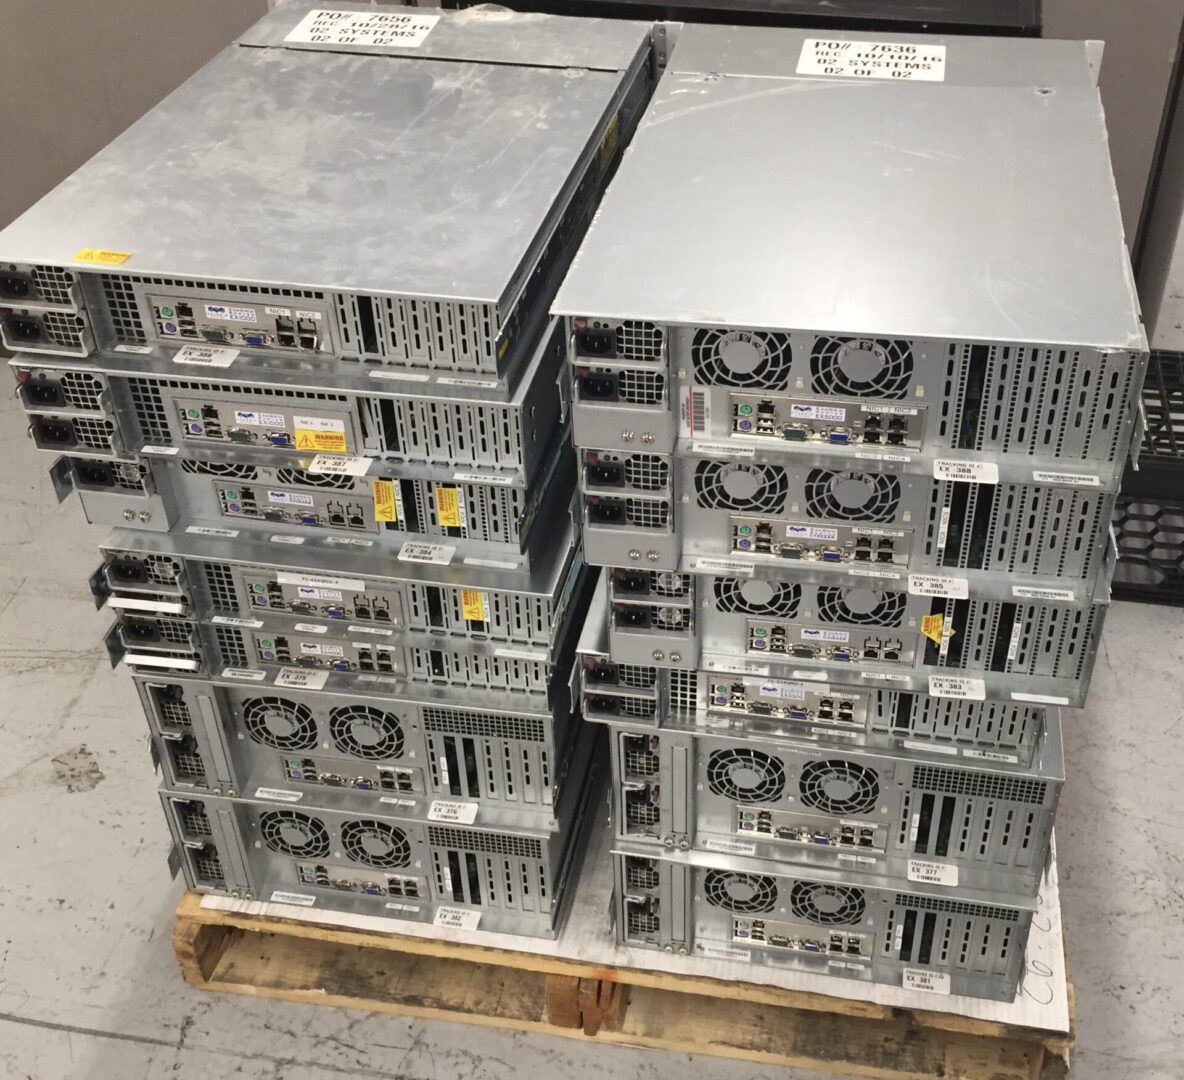 A stack of servers sitting on top of each other.